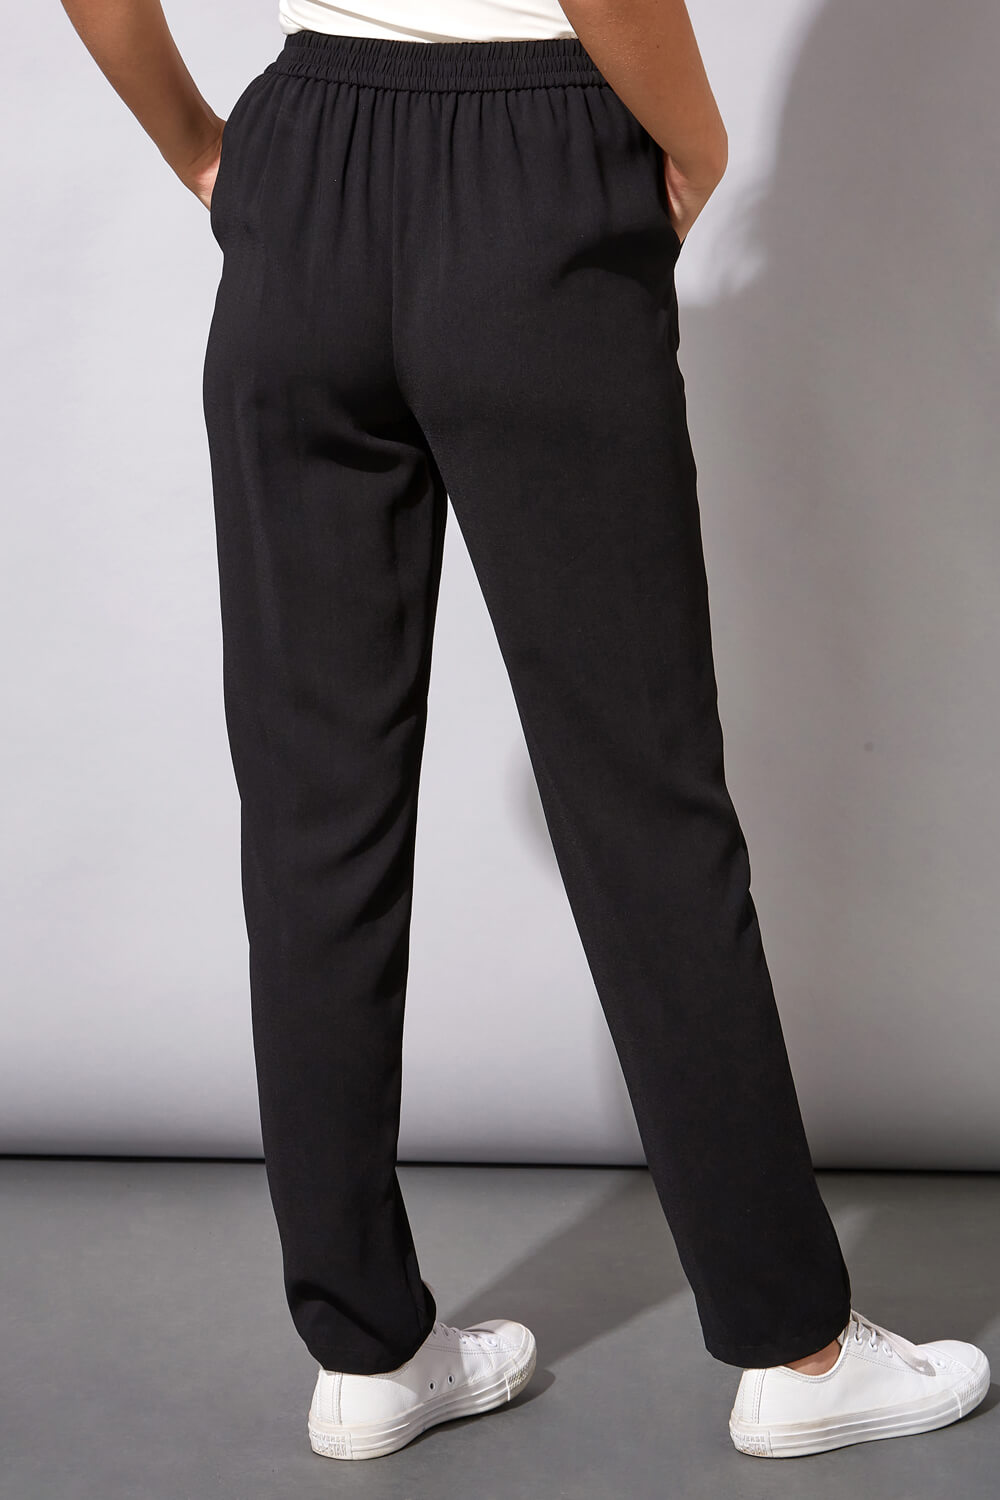 Black 27 Inch Tie Front Jogger, Image 2 of 4